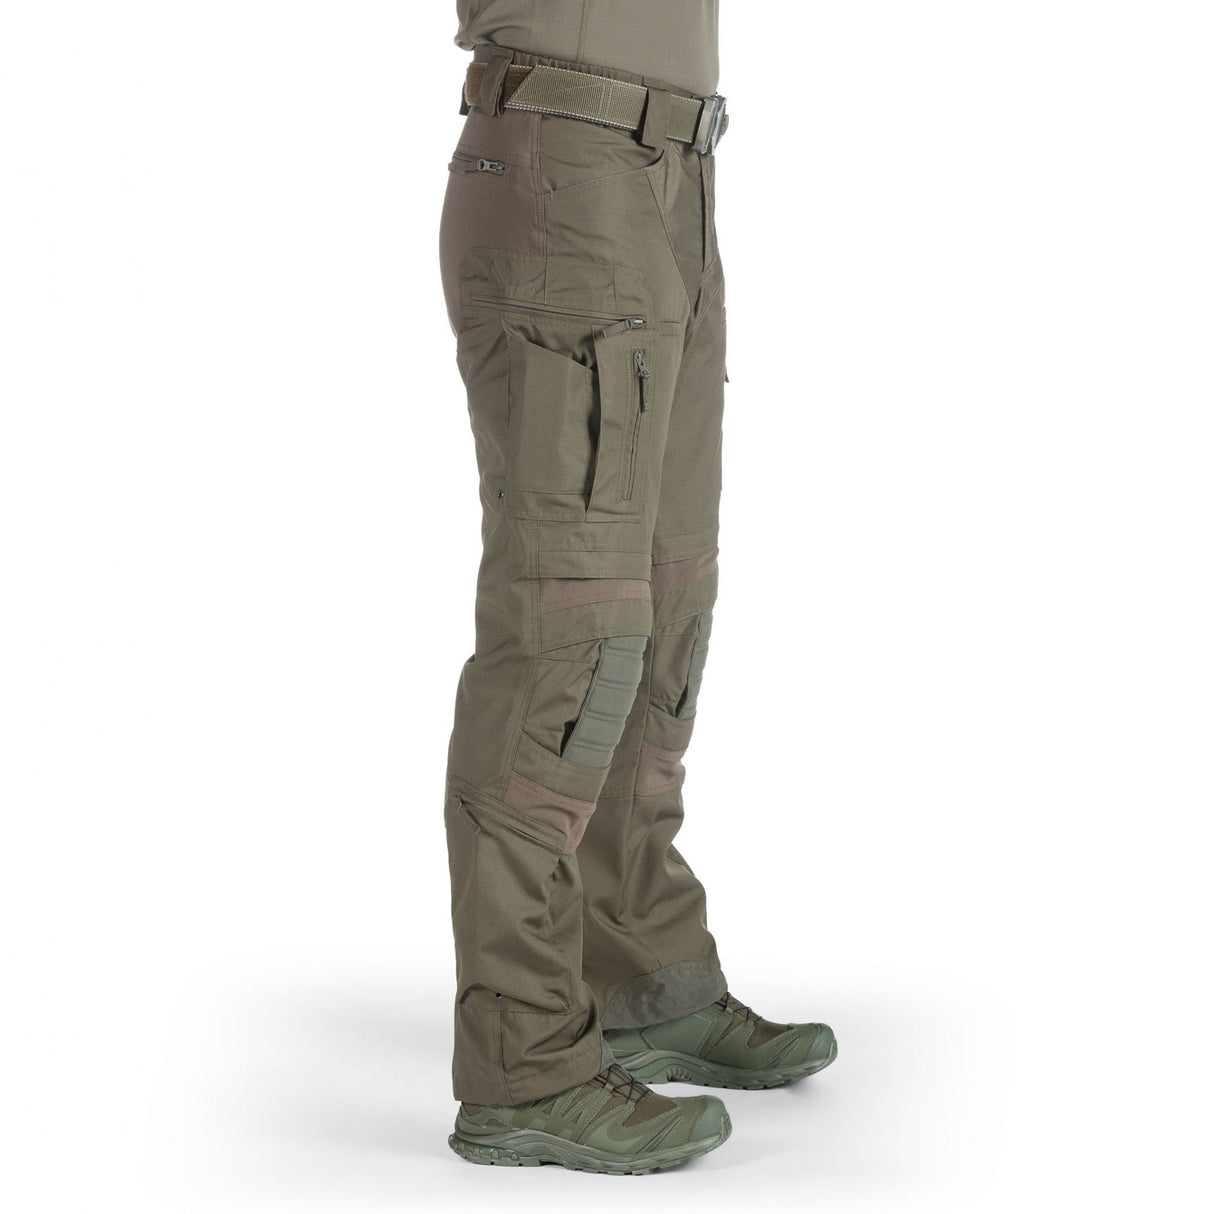 Tactical Trousers: Schoeller®-dynamic material, breathable ripstop blend, CORDURA® reinforcements.